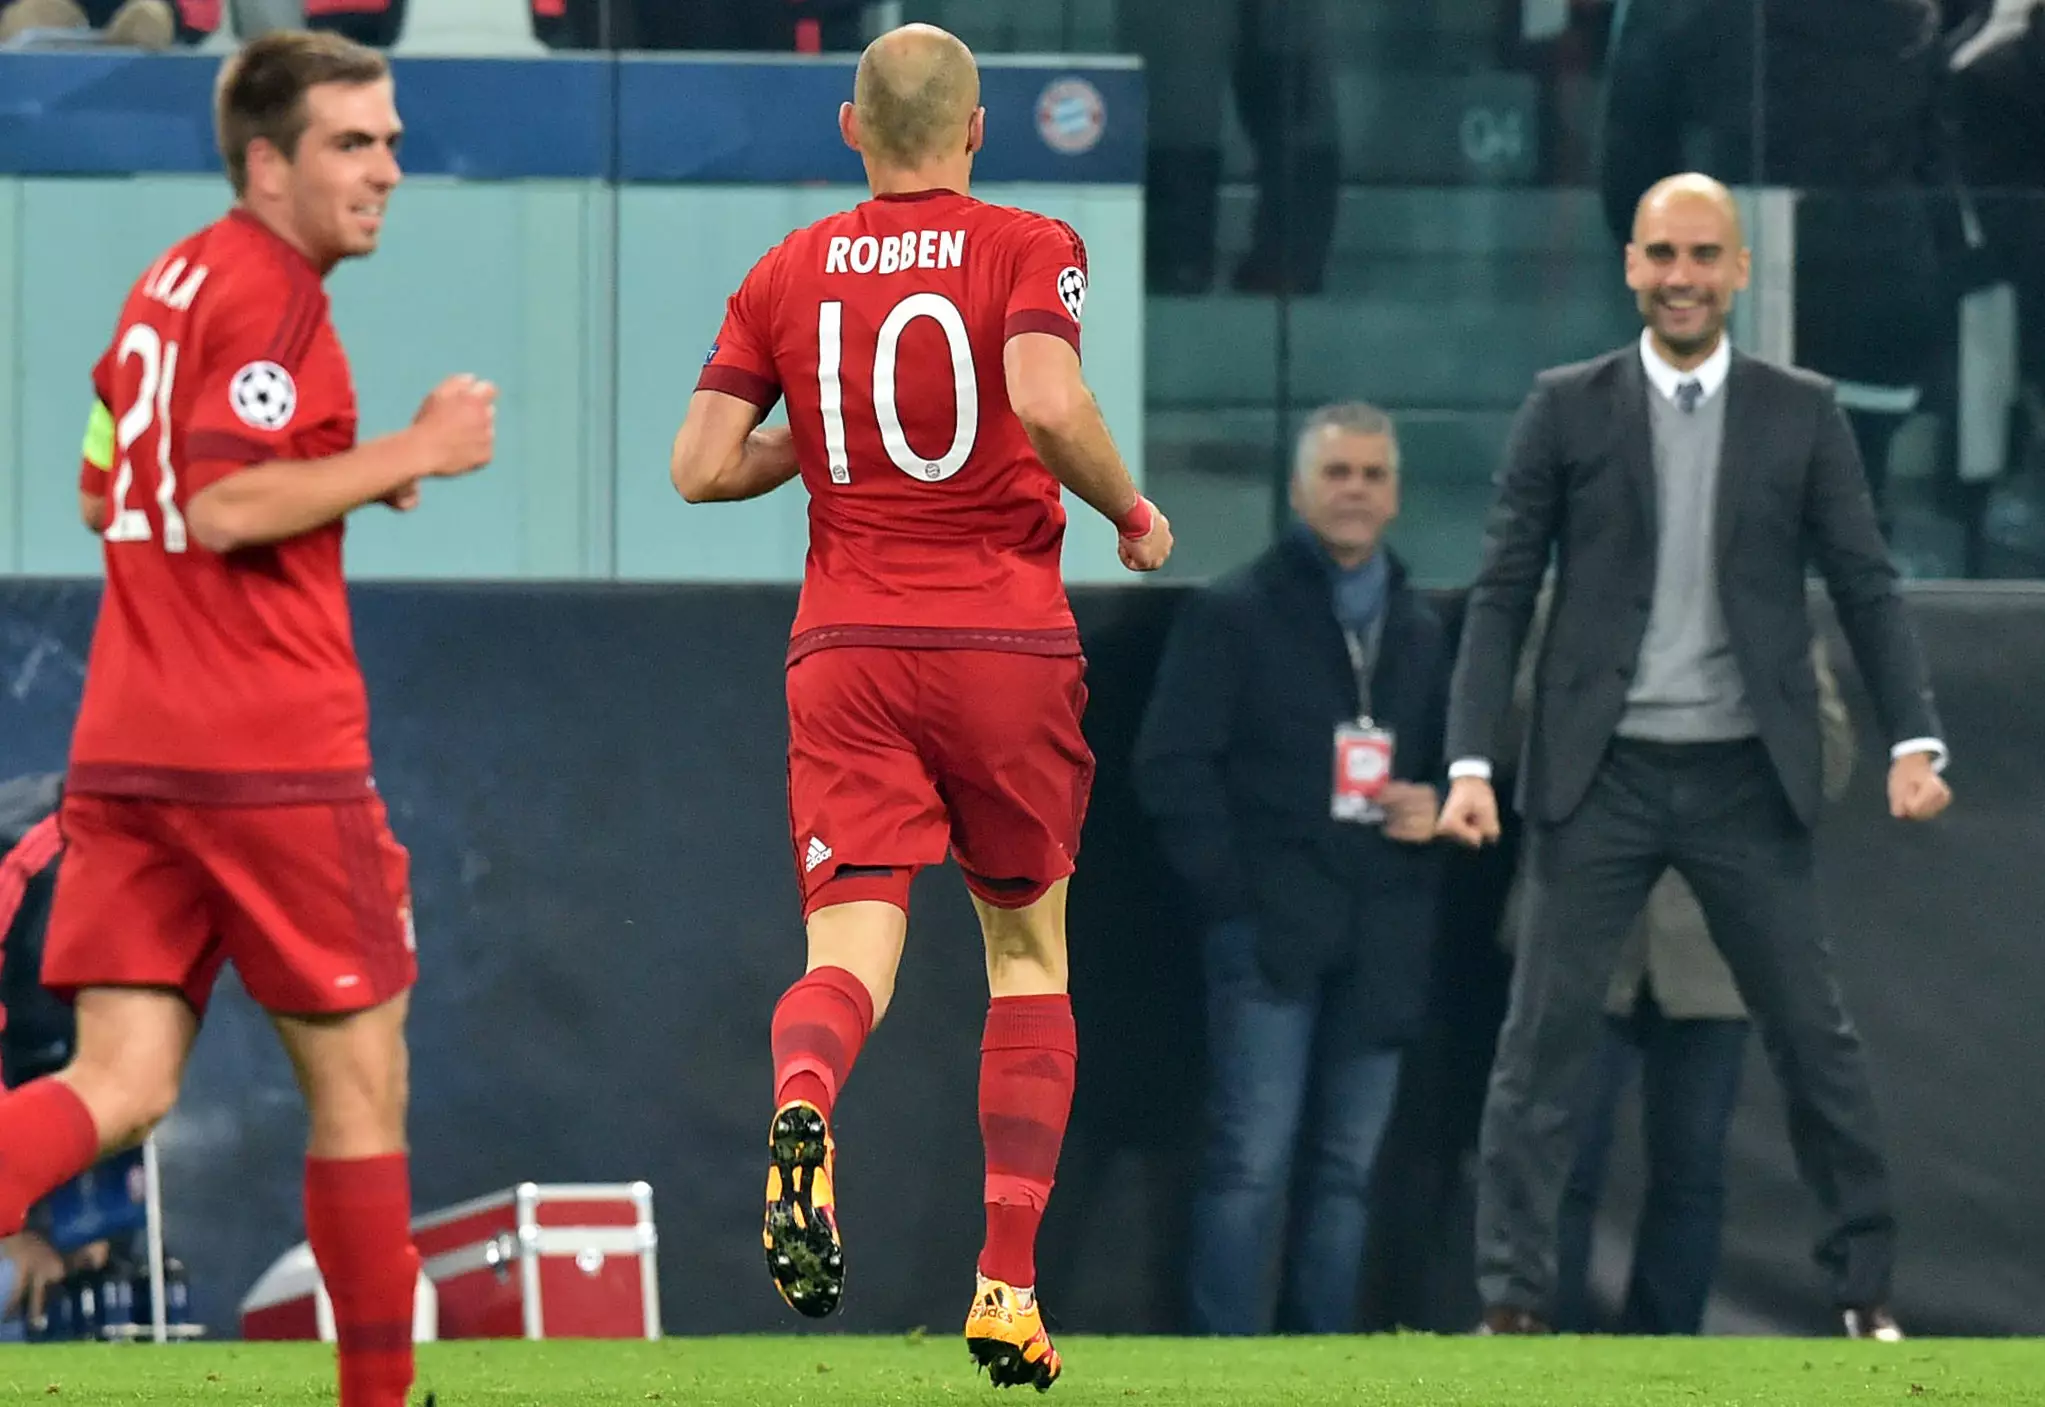 Guardiola and Robben enjoyed decent success together. Image: PA Images